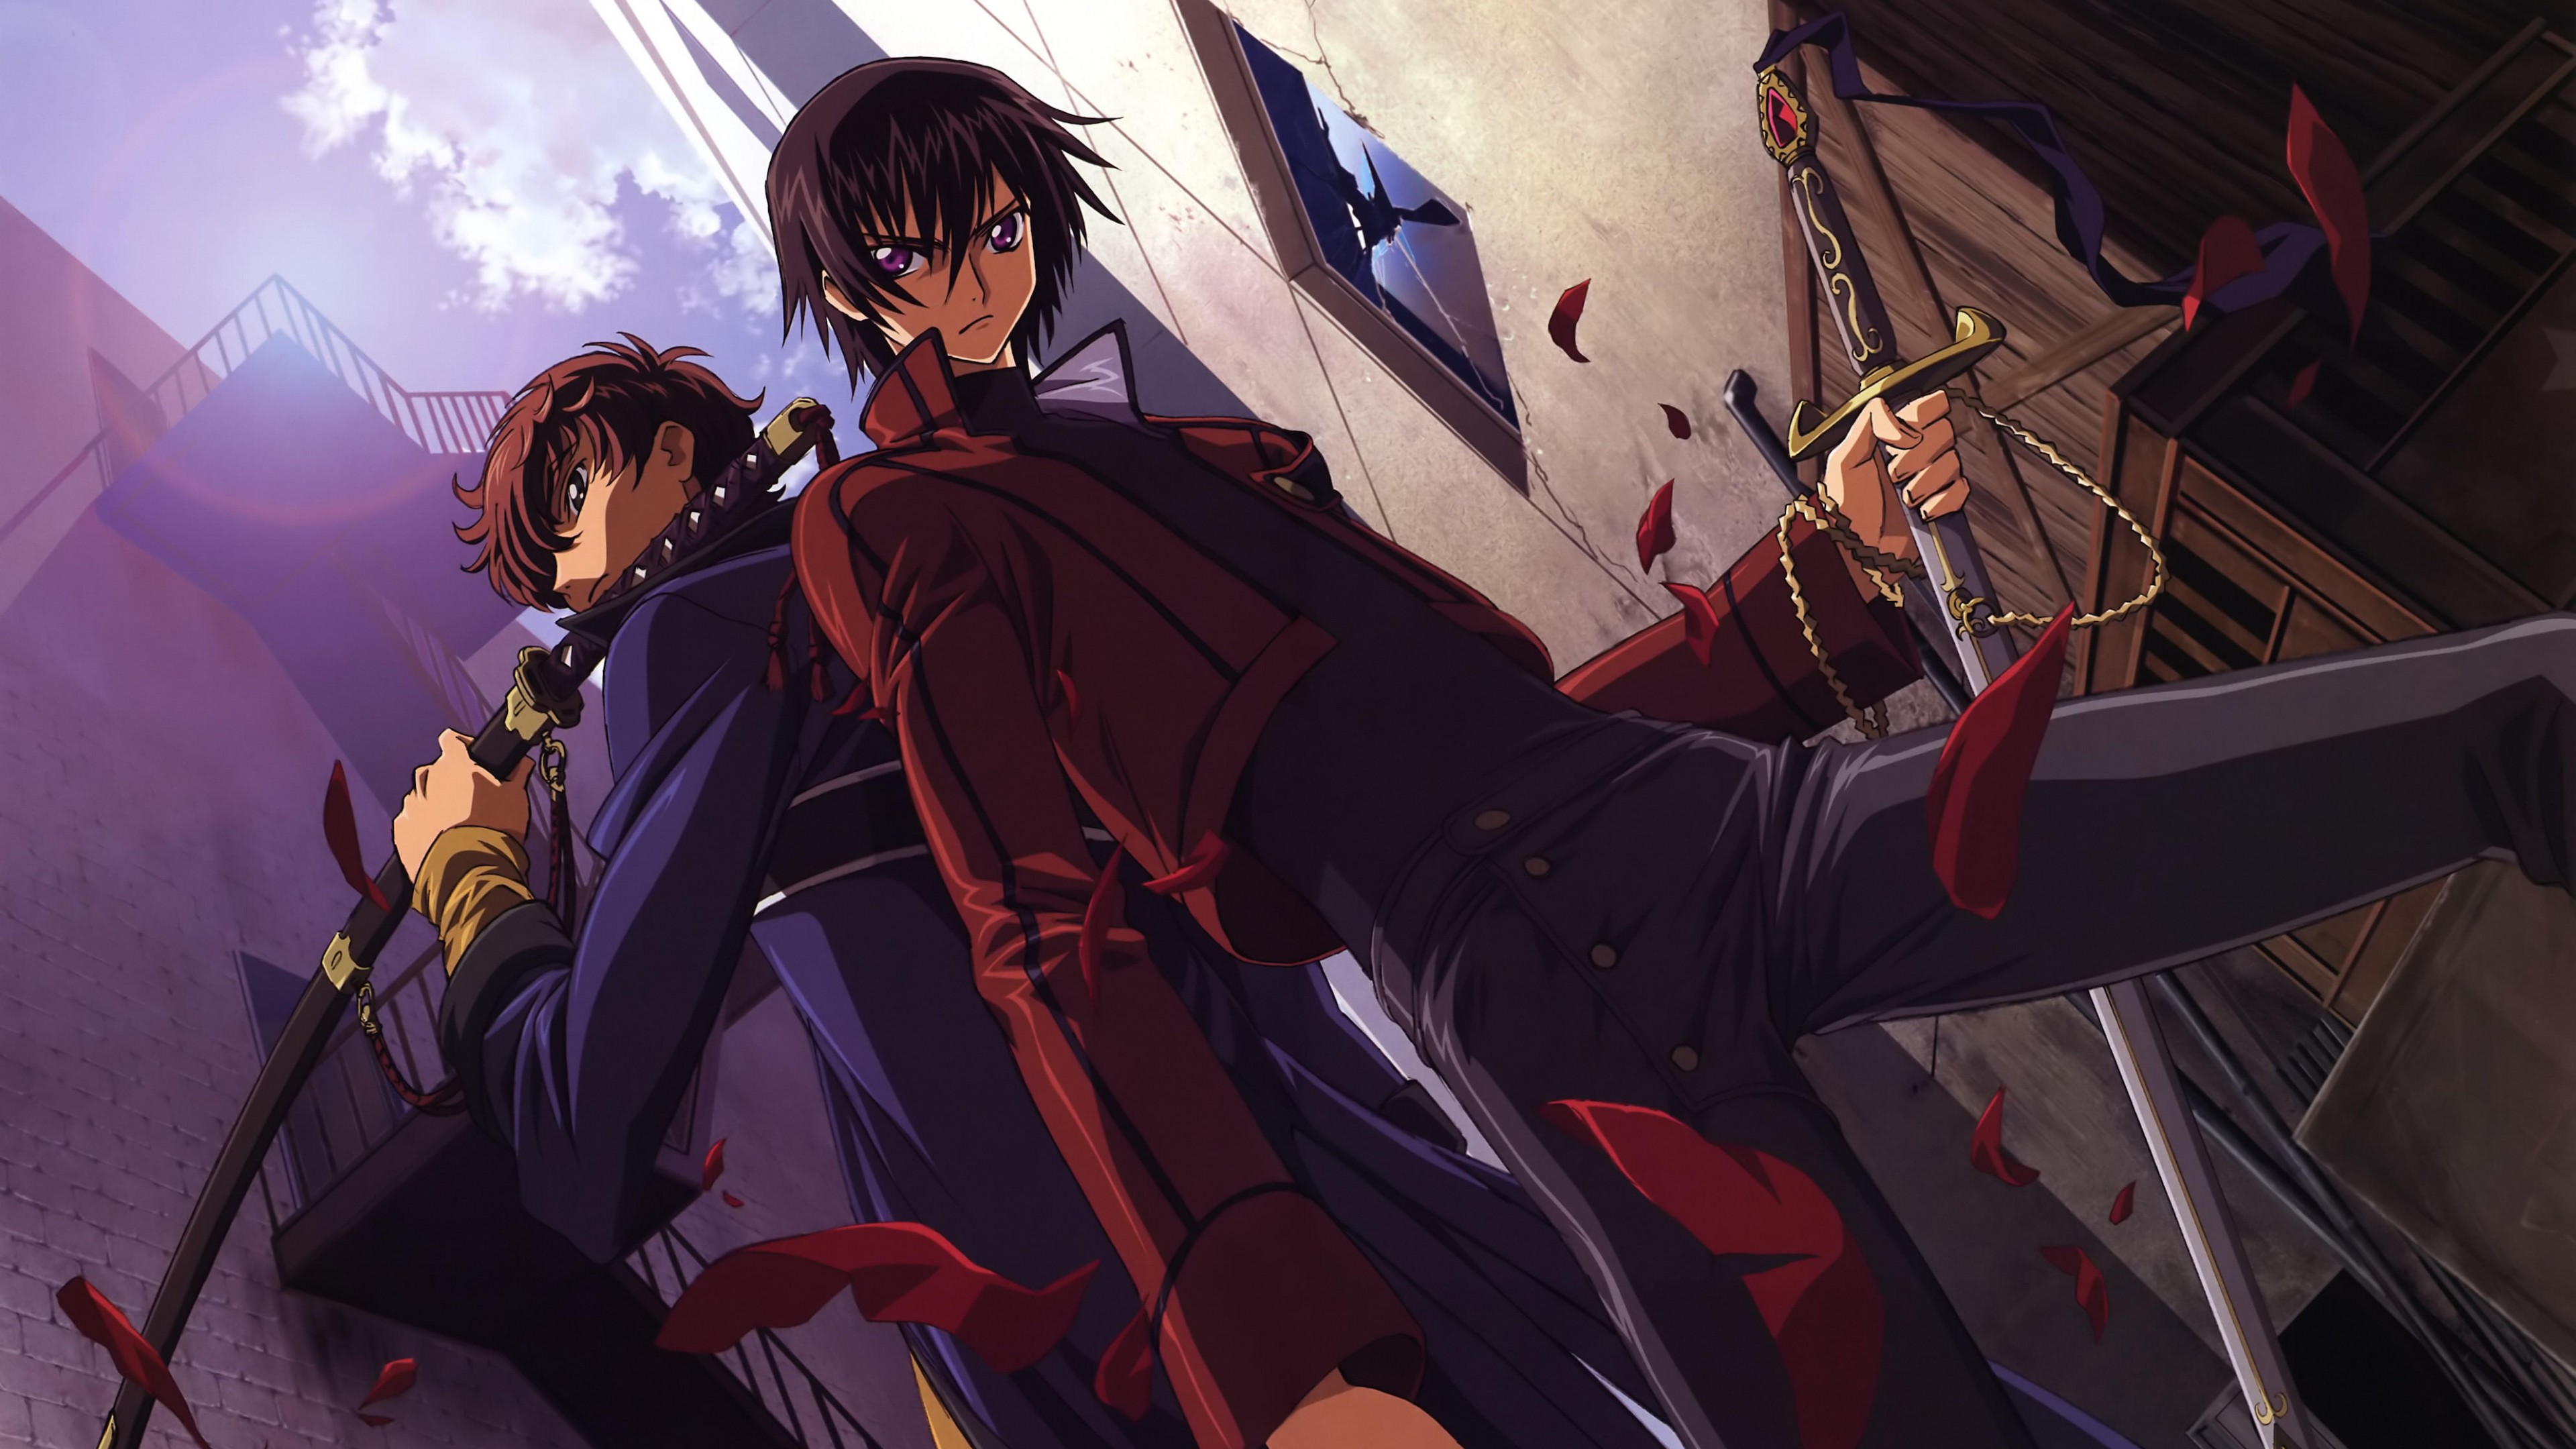 Geass 4k Wallpapers For Your Desktop Or Mobile Screen Free And Easy To Download